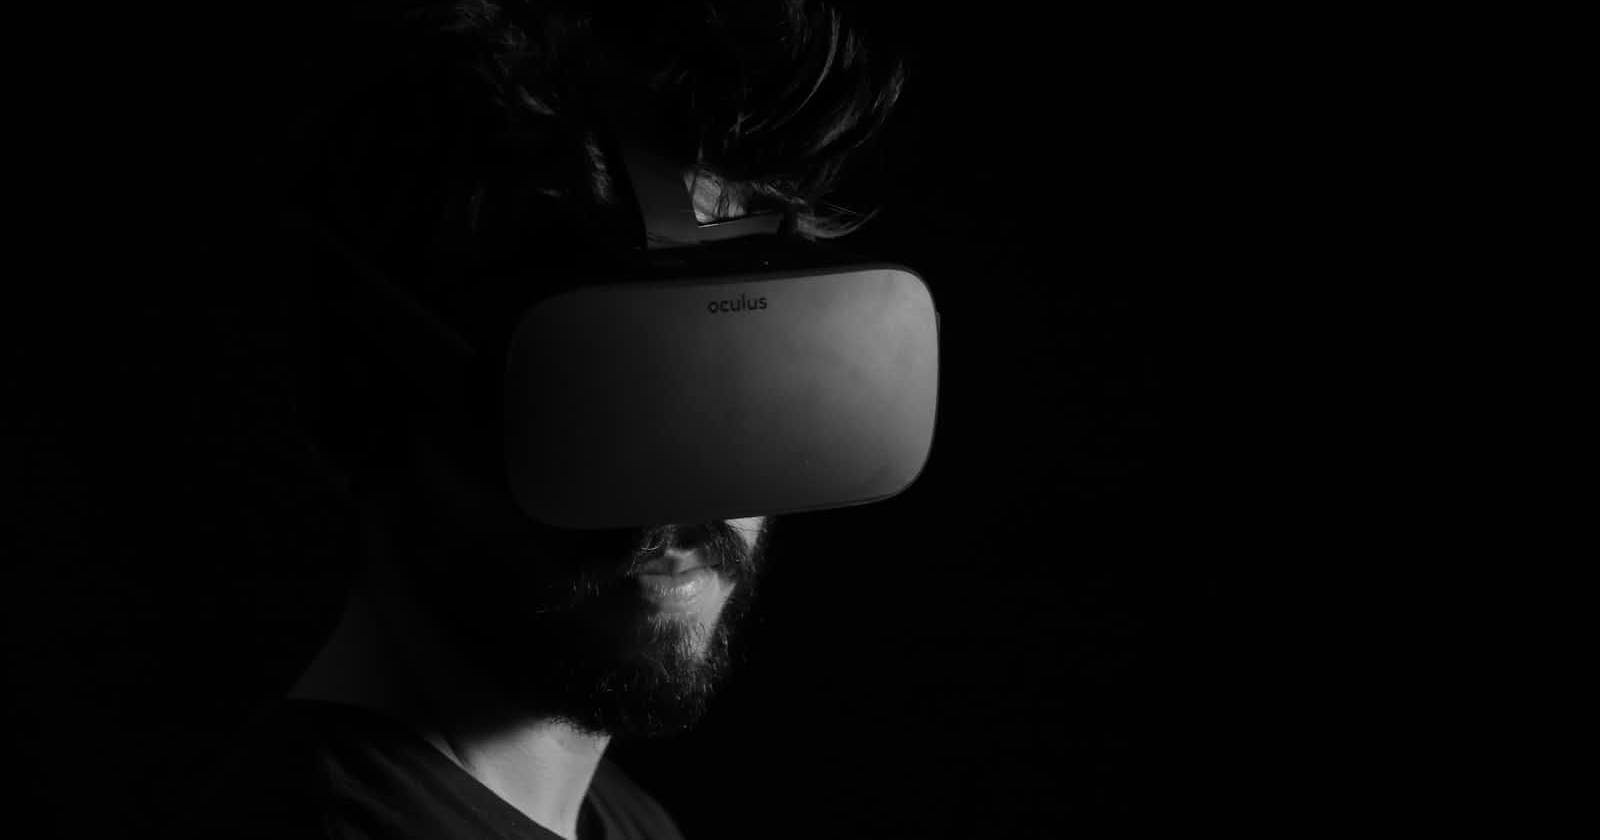 Is VR really the future?